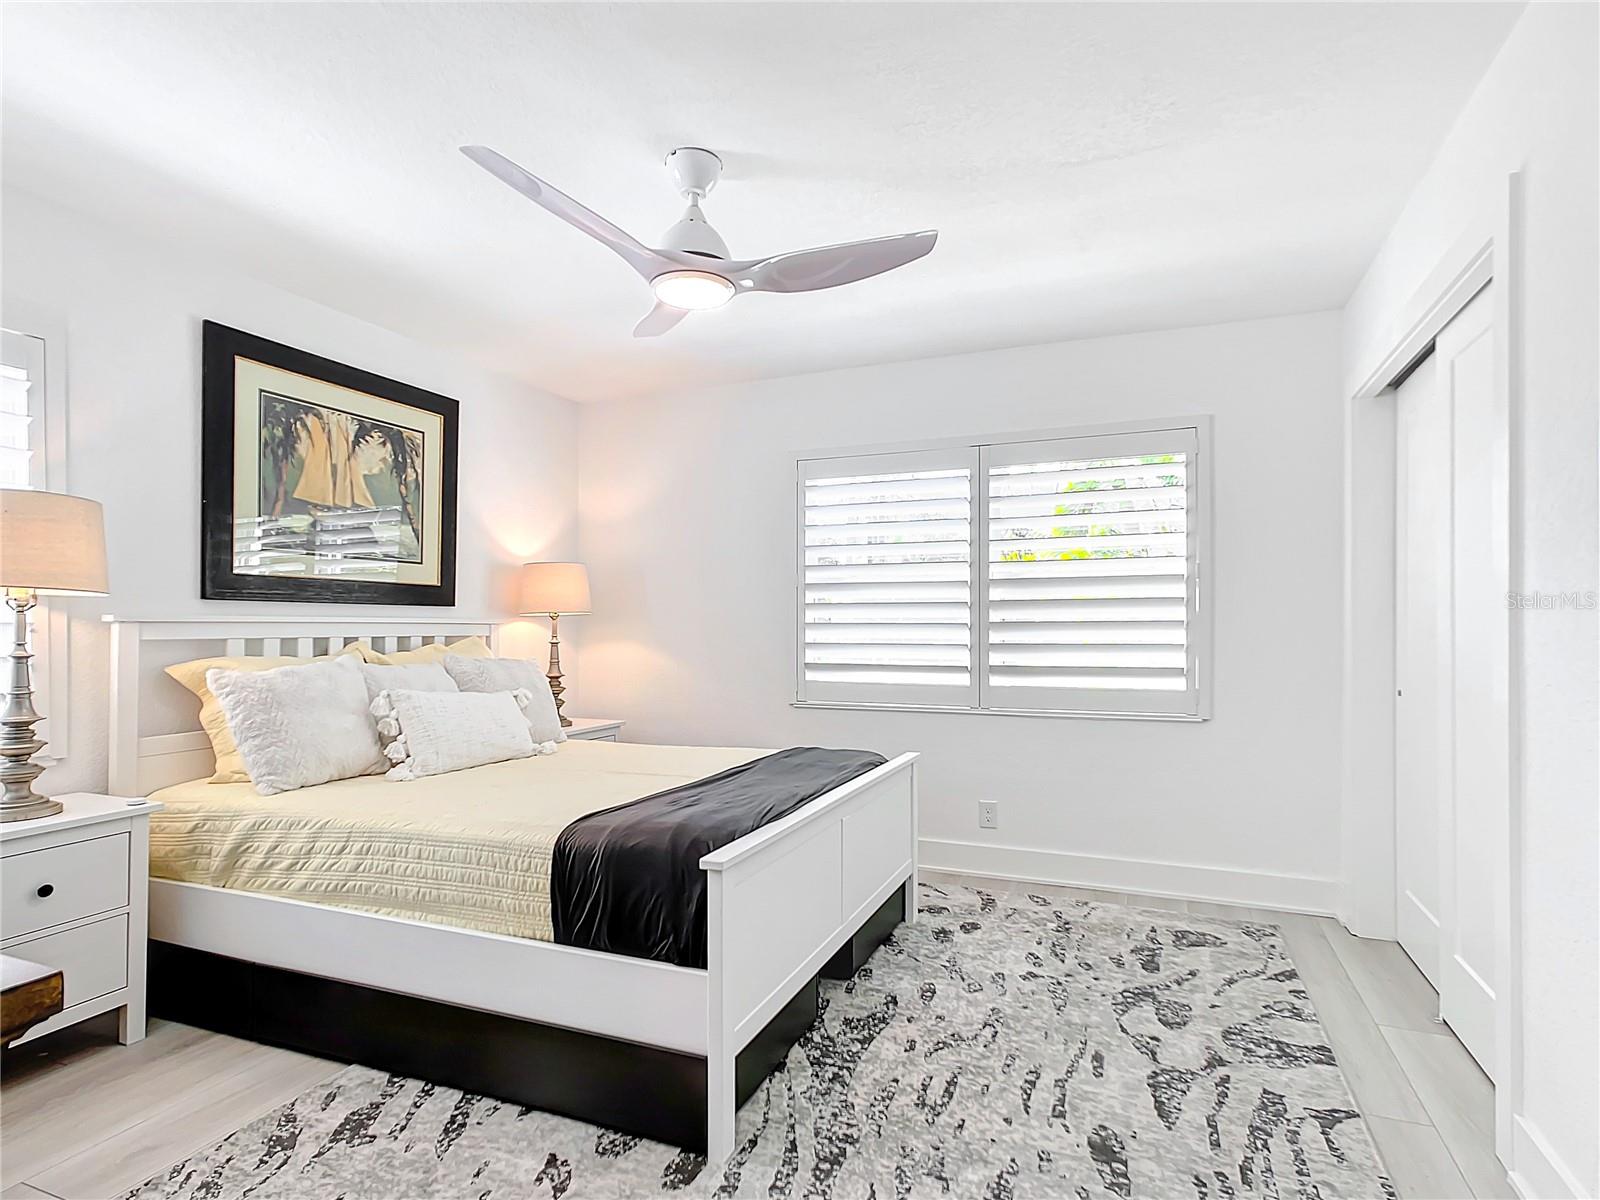 The 3rd bedroom, adorned with plantation shutters has a built-in closet with organizers.